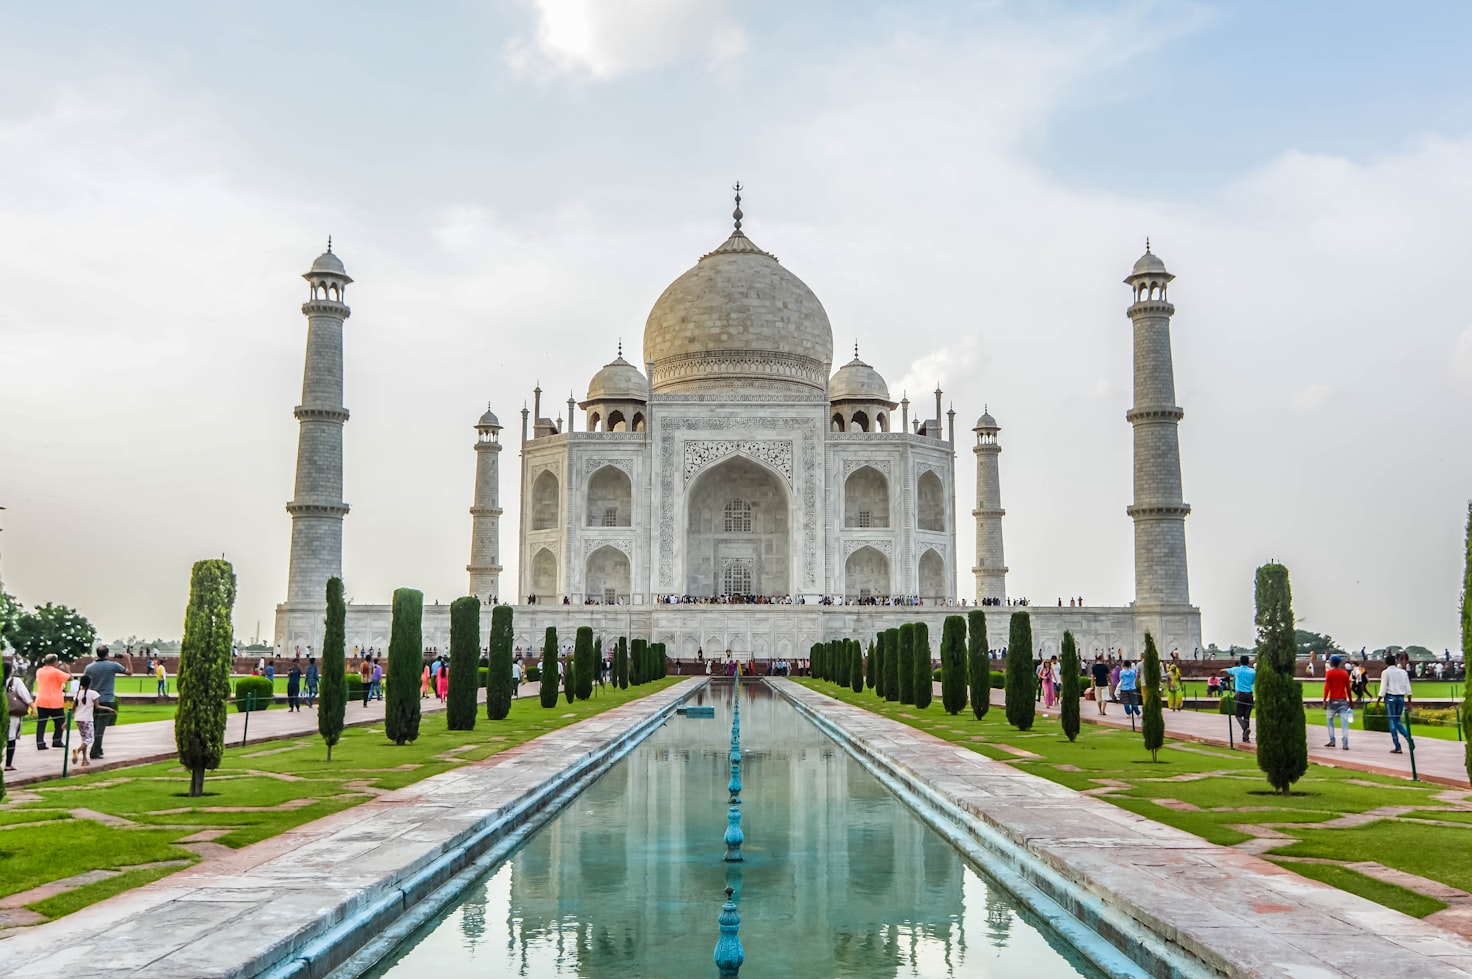 Taj Mahal is a world-famous mausoleum located in Agra, in the northern state of Uttar Pradesh